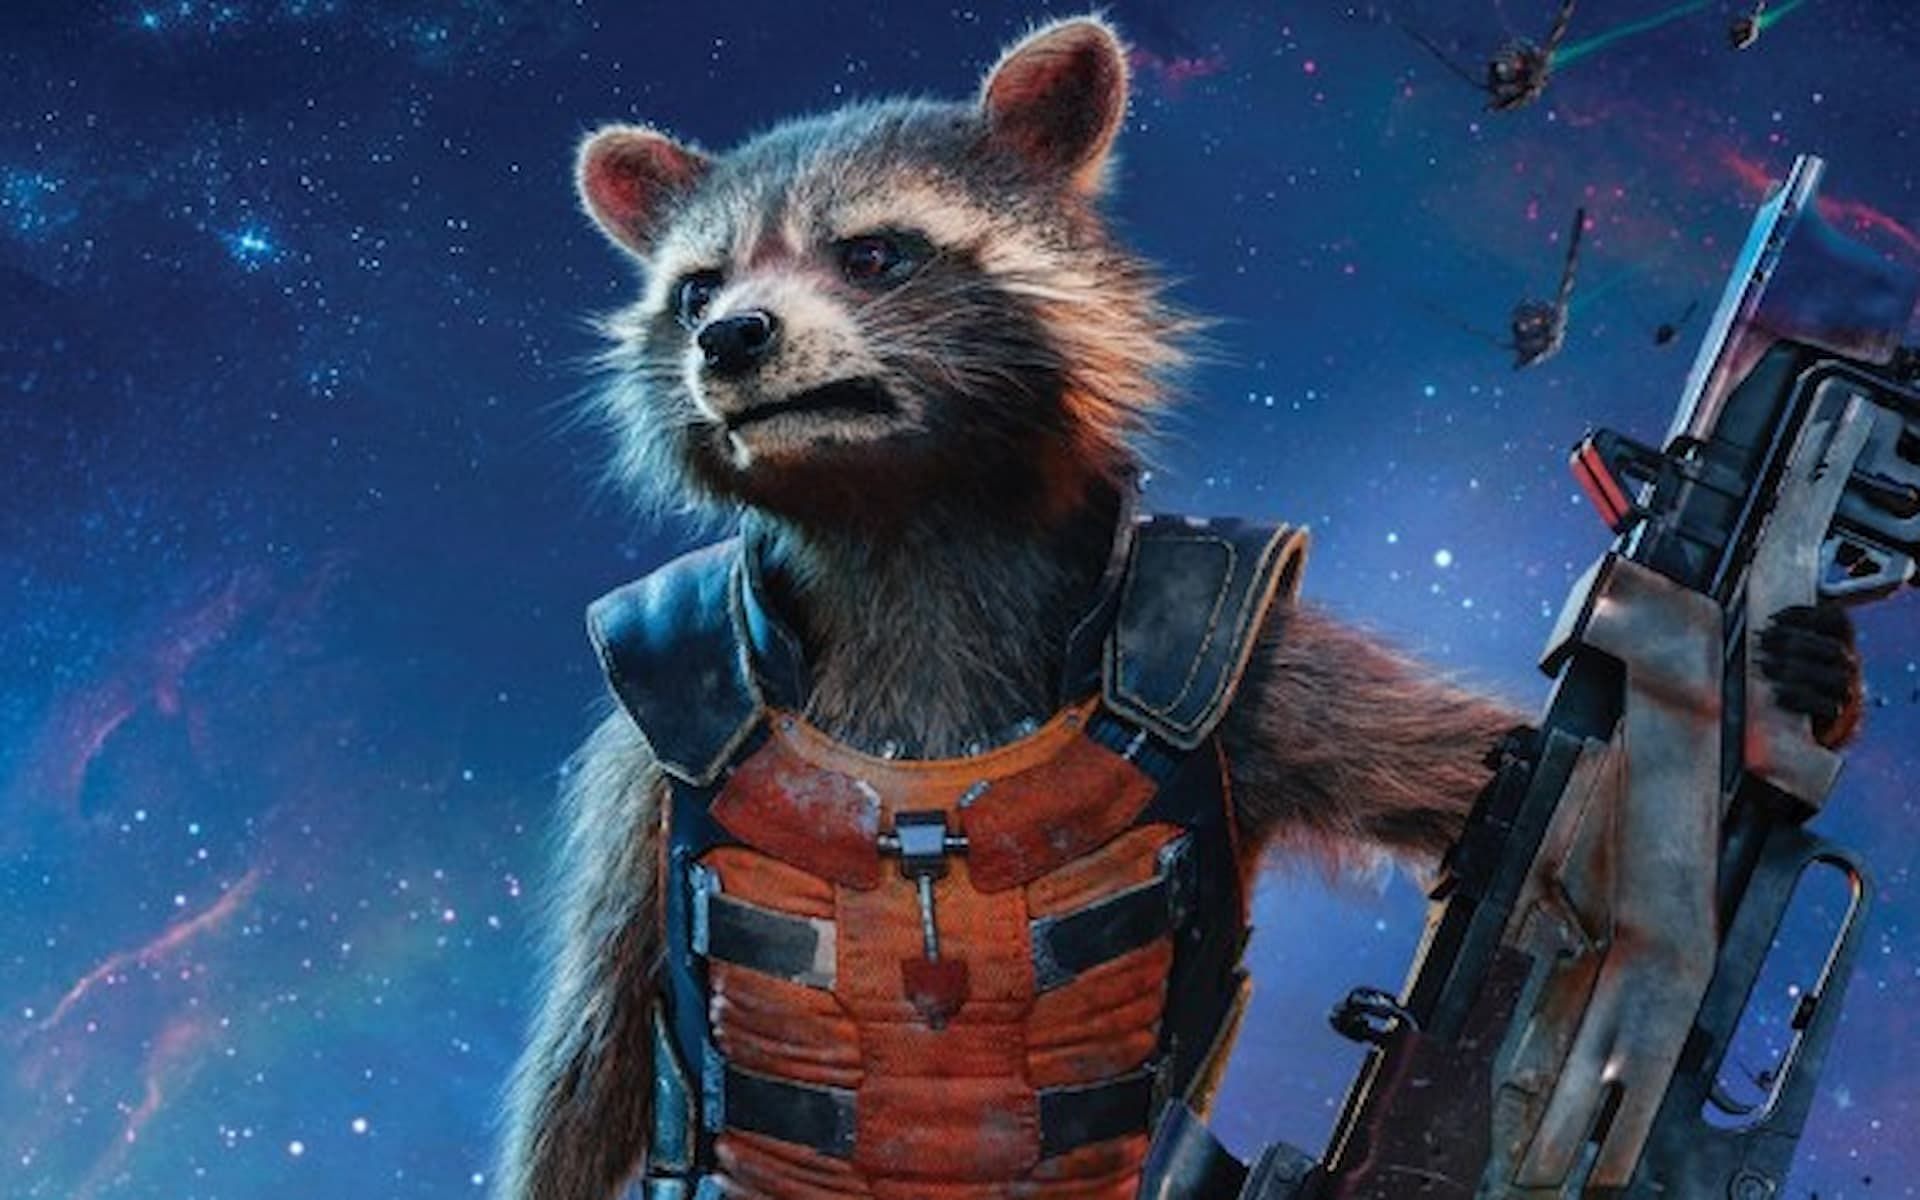 Where To Find The Mcu Rocket Outfit In Marvels Guardians Of The Galaxy